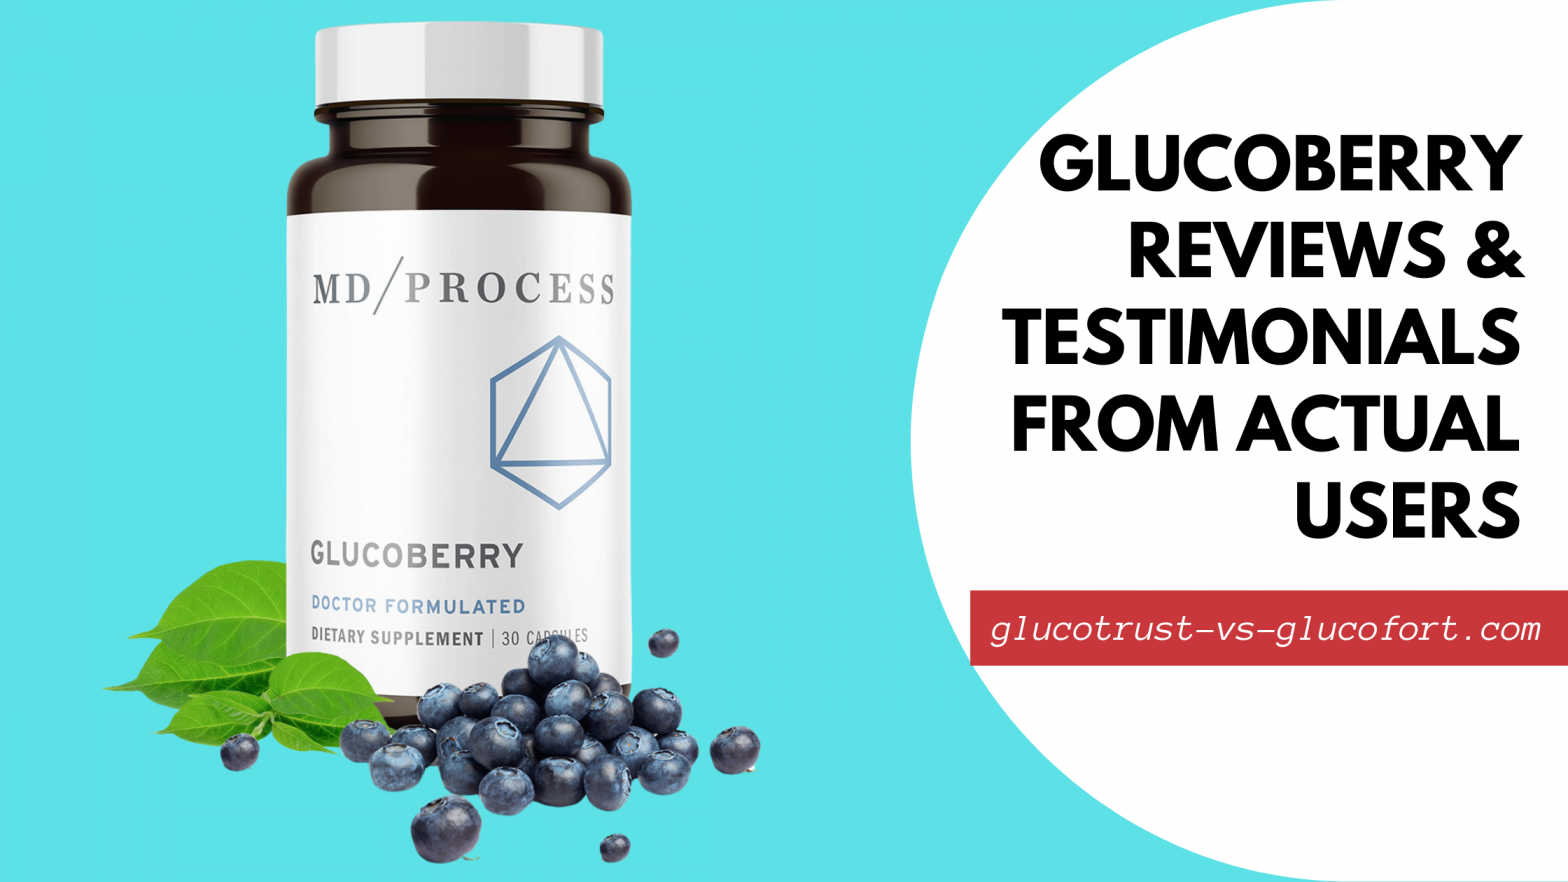 GlucoBerry Reviews Featured Image